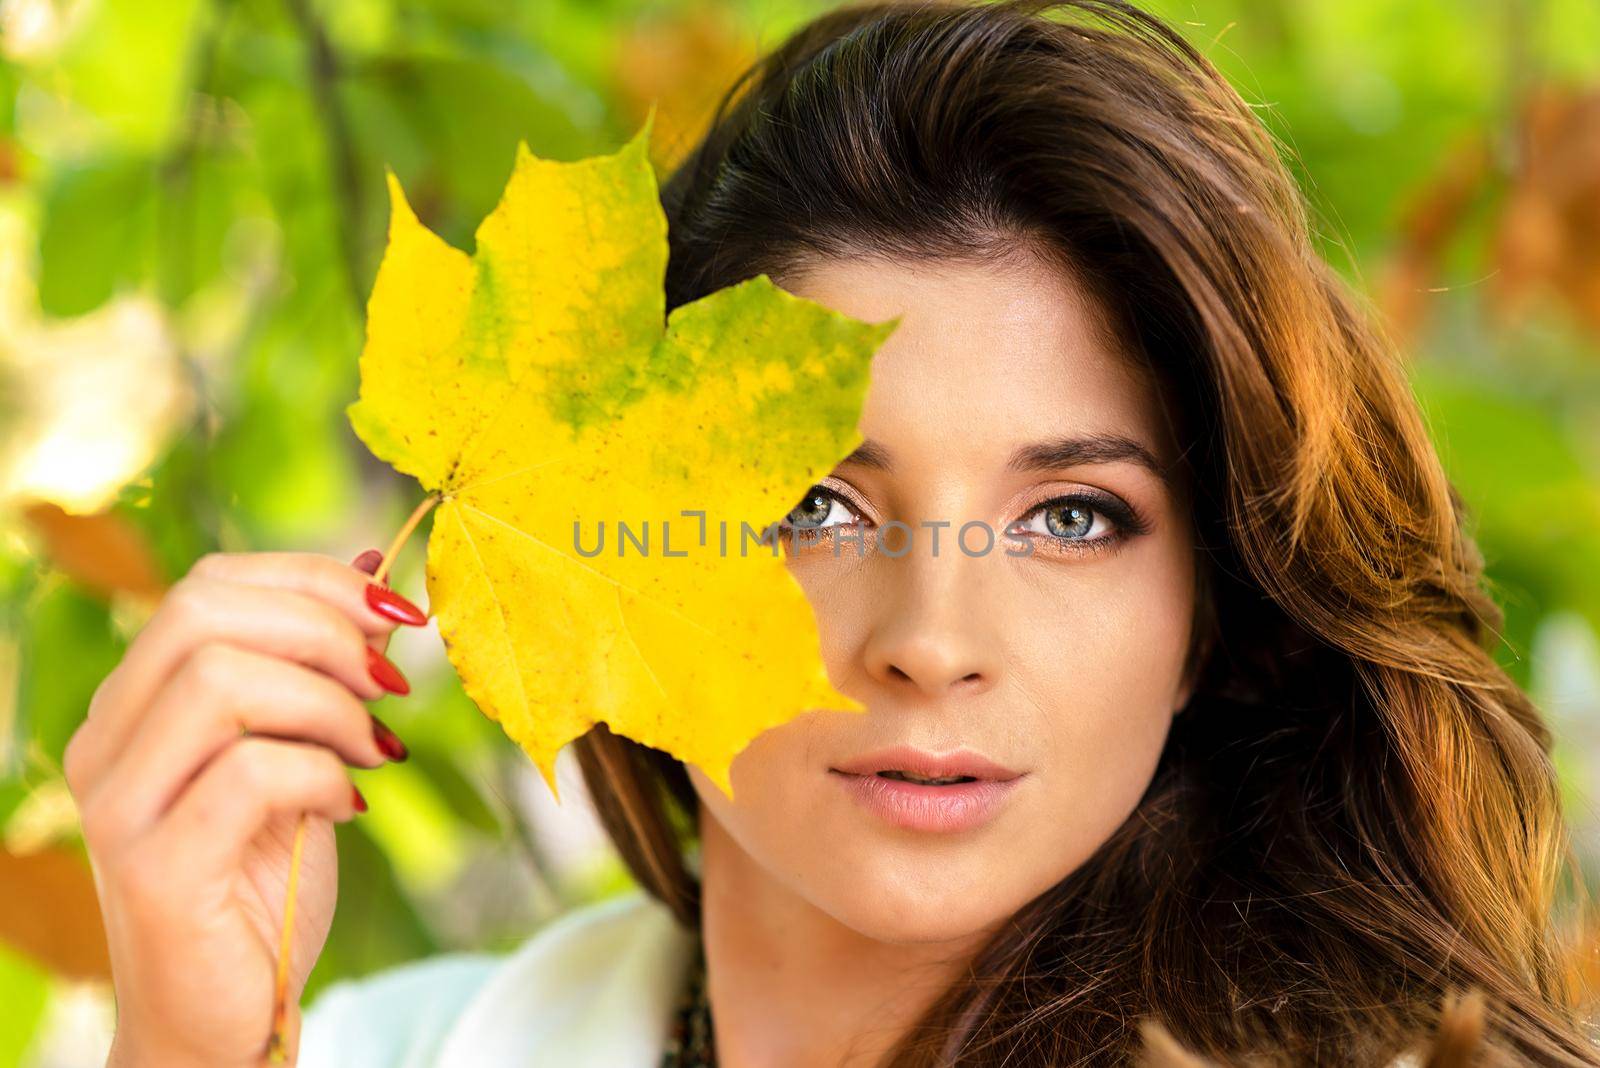 Autumn woman in the park by wdnet_studio